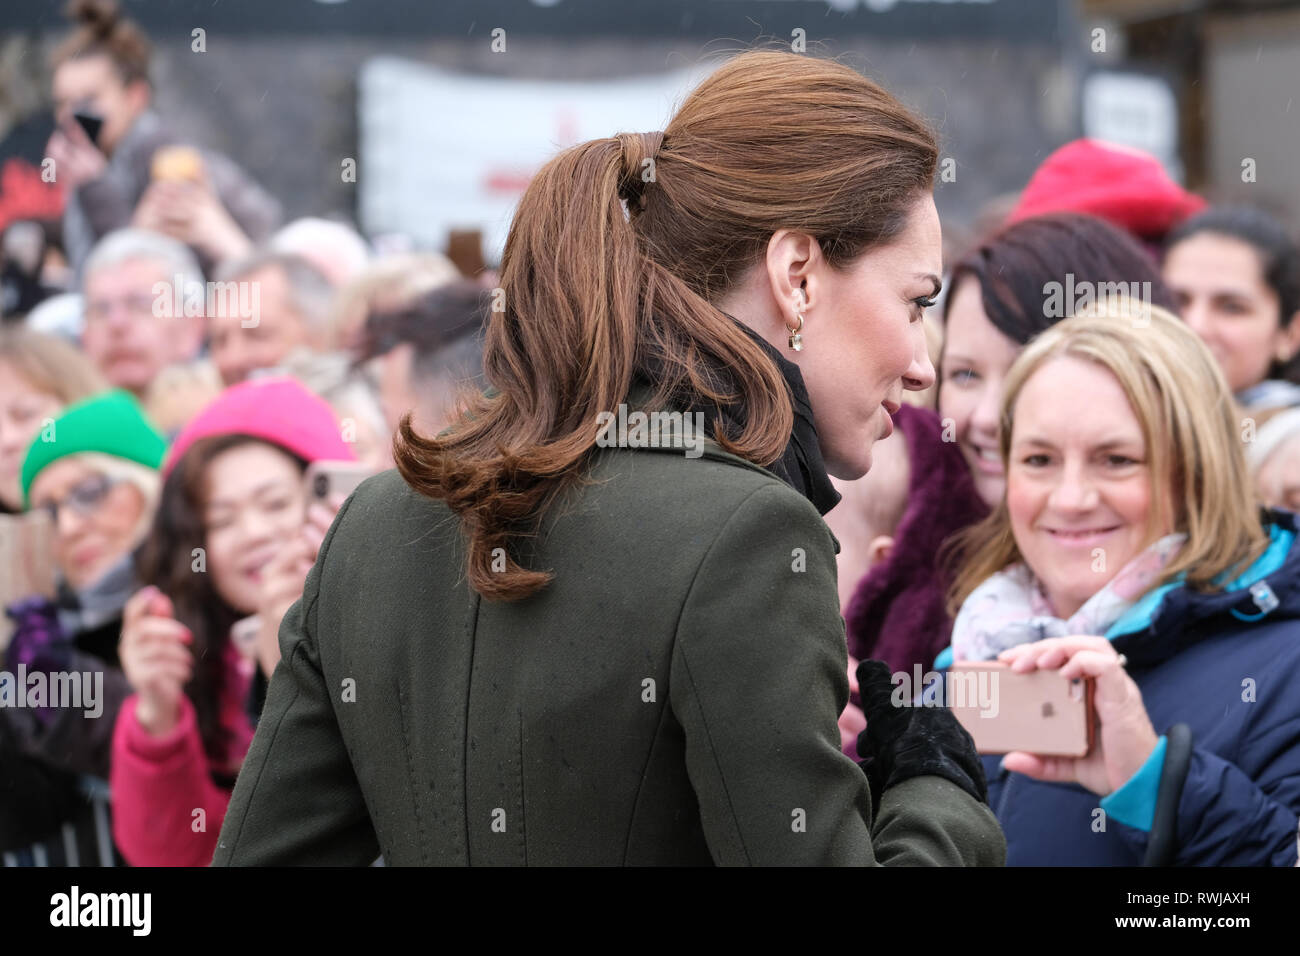 Blackpool, UK. 6th March 2019. The Duke and Duchess of Cambridge meeting members of the public on a wet day in Blackpool.  The Royals chatted to the public when they viewed the ‘Comedy Carpet’. The walkabout followed a visit to the Town’s most famous landmark, Blackpool Tower where they learned about the resort’s recent history, challenges and the investment and regeneration efforts that are underway. Credit: Paul Melling/Alamy Live News Stock Photo